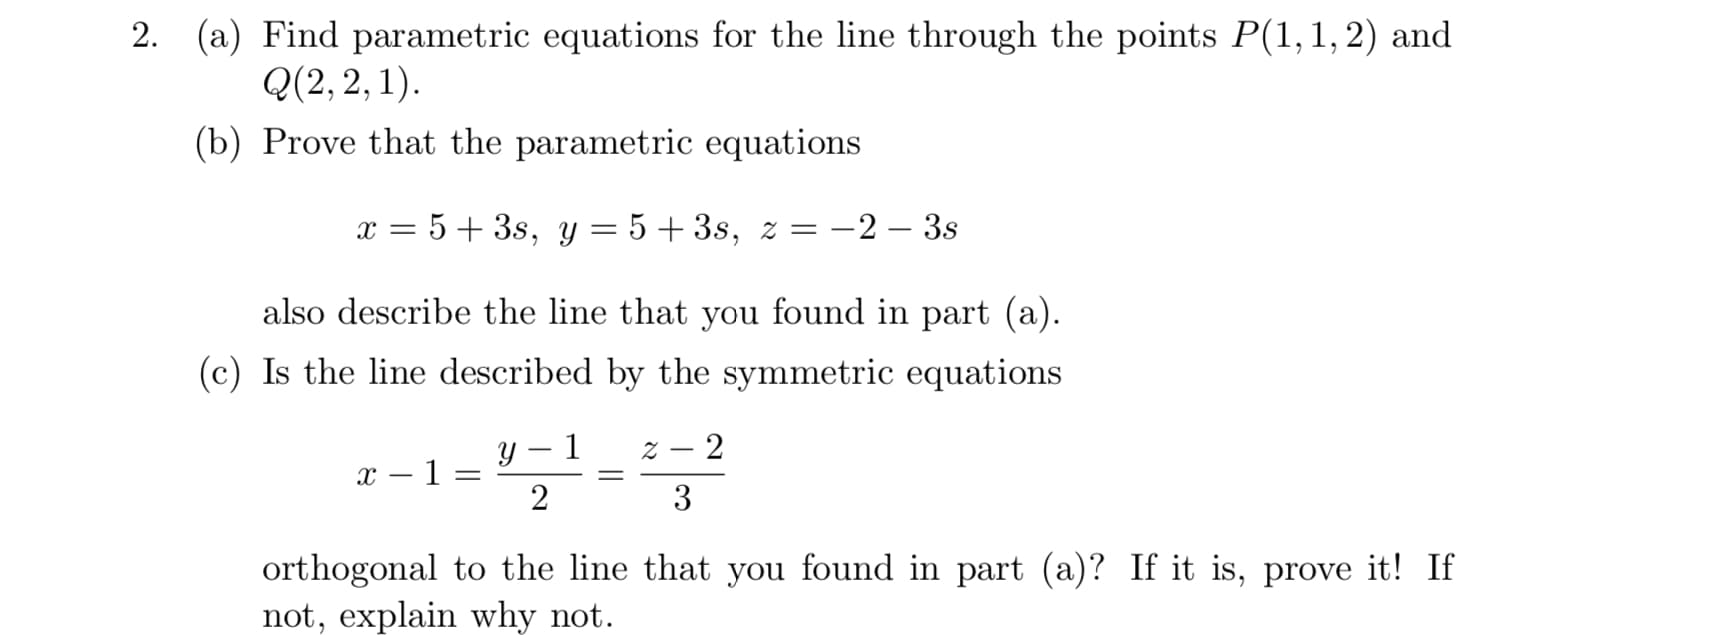 2. (a) Find parametric equations for the line through the points P(1,1,2) and
Q(2, 2, 1).
(b) Prove that the parametric equations
x = 5+ 3s, y = 5+3s, z =
Е —2 — 3s
also describe the line that you found in part (a).
(c) Is the line described by the symmetric equations
z – 2
у — 1
x – 1 =
2
|
3
orthogonal to the line that you found in part (a)? If it is, prove it! If
not, explain why not.
